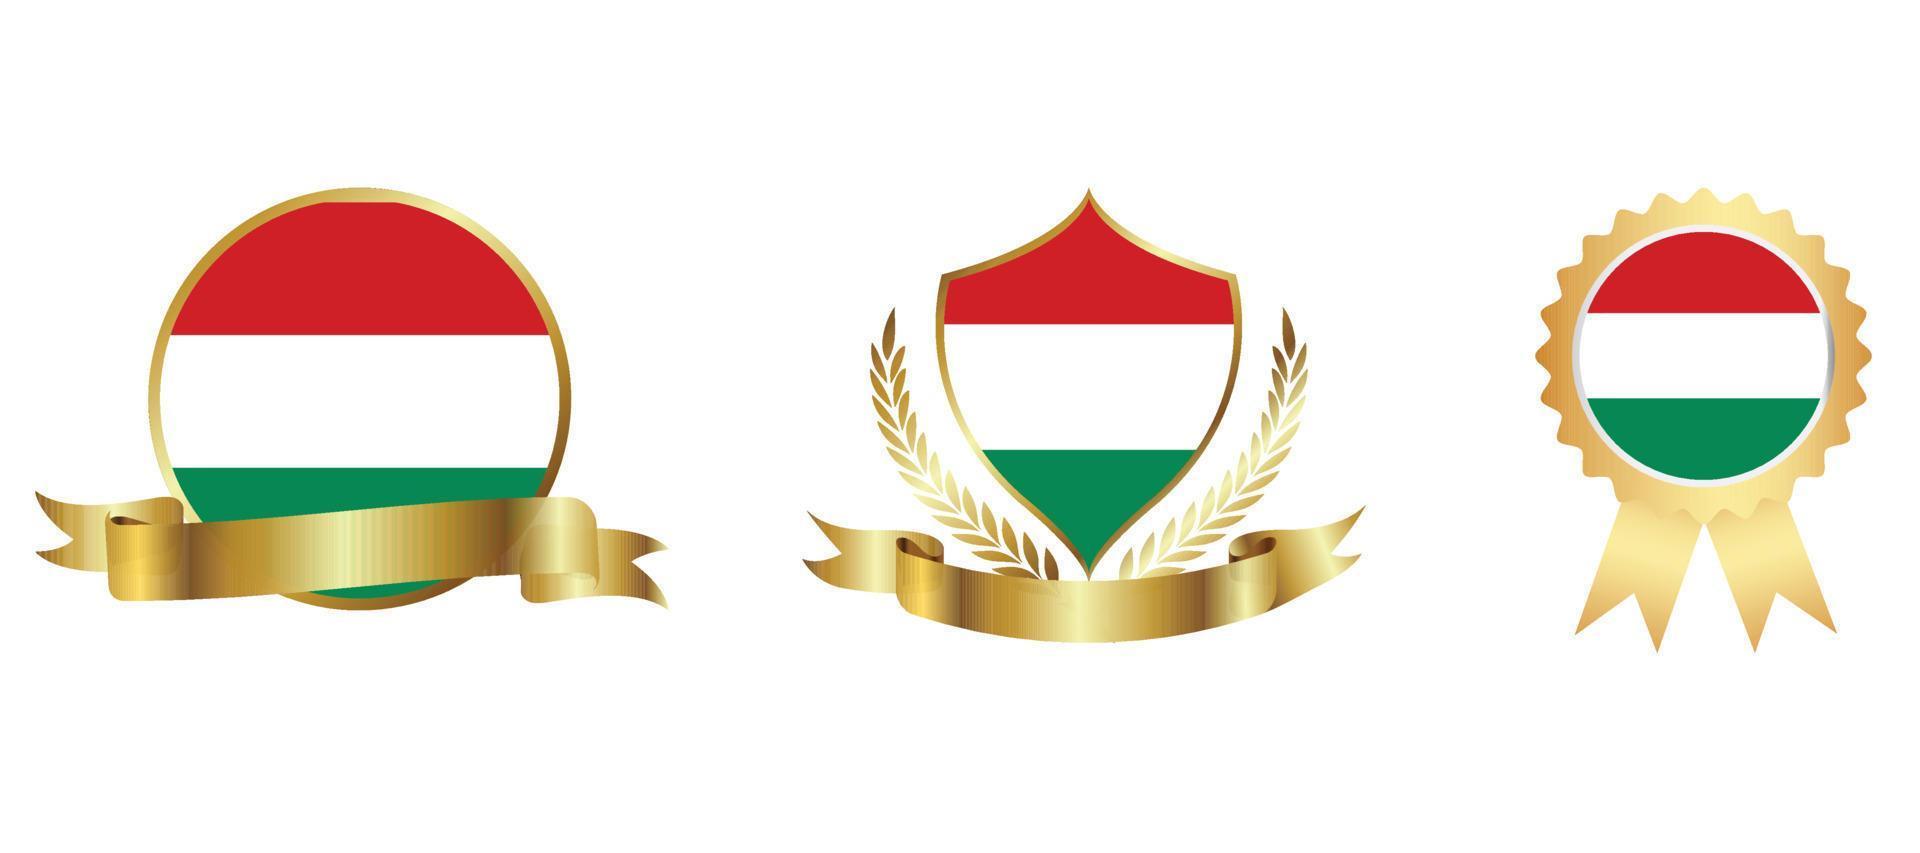 Hungary flag icon . web icon set . icons collection flat. Simple vector illustration.